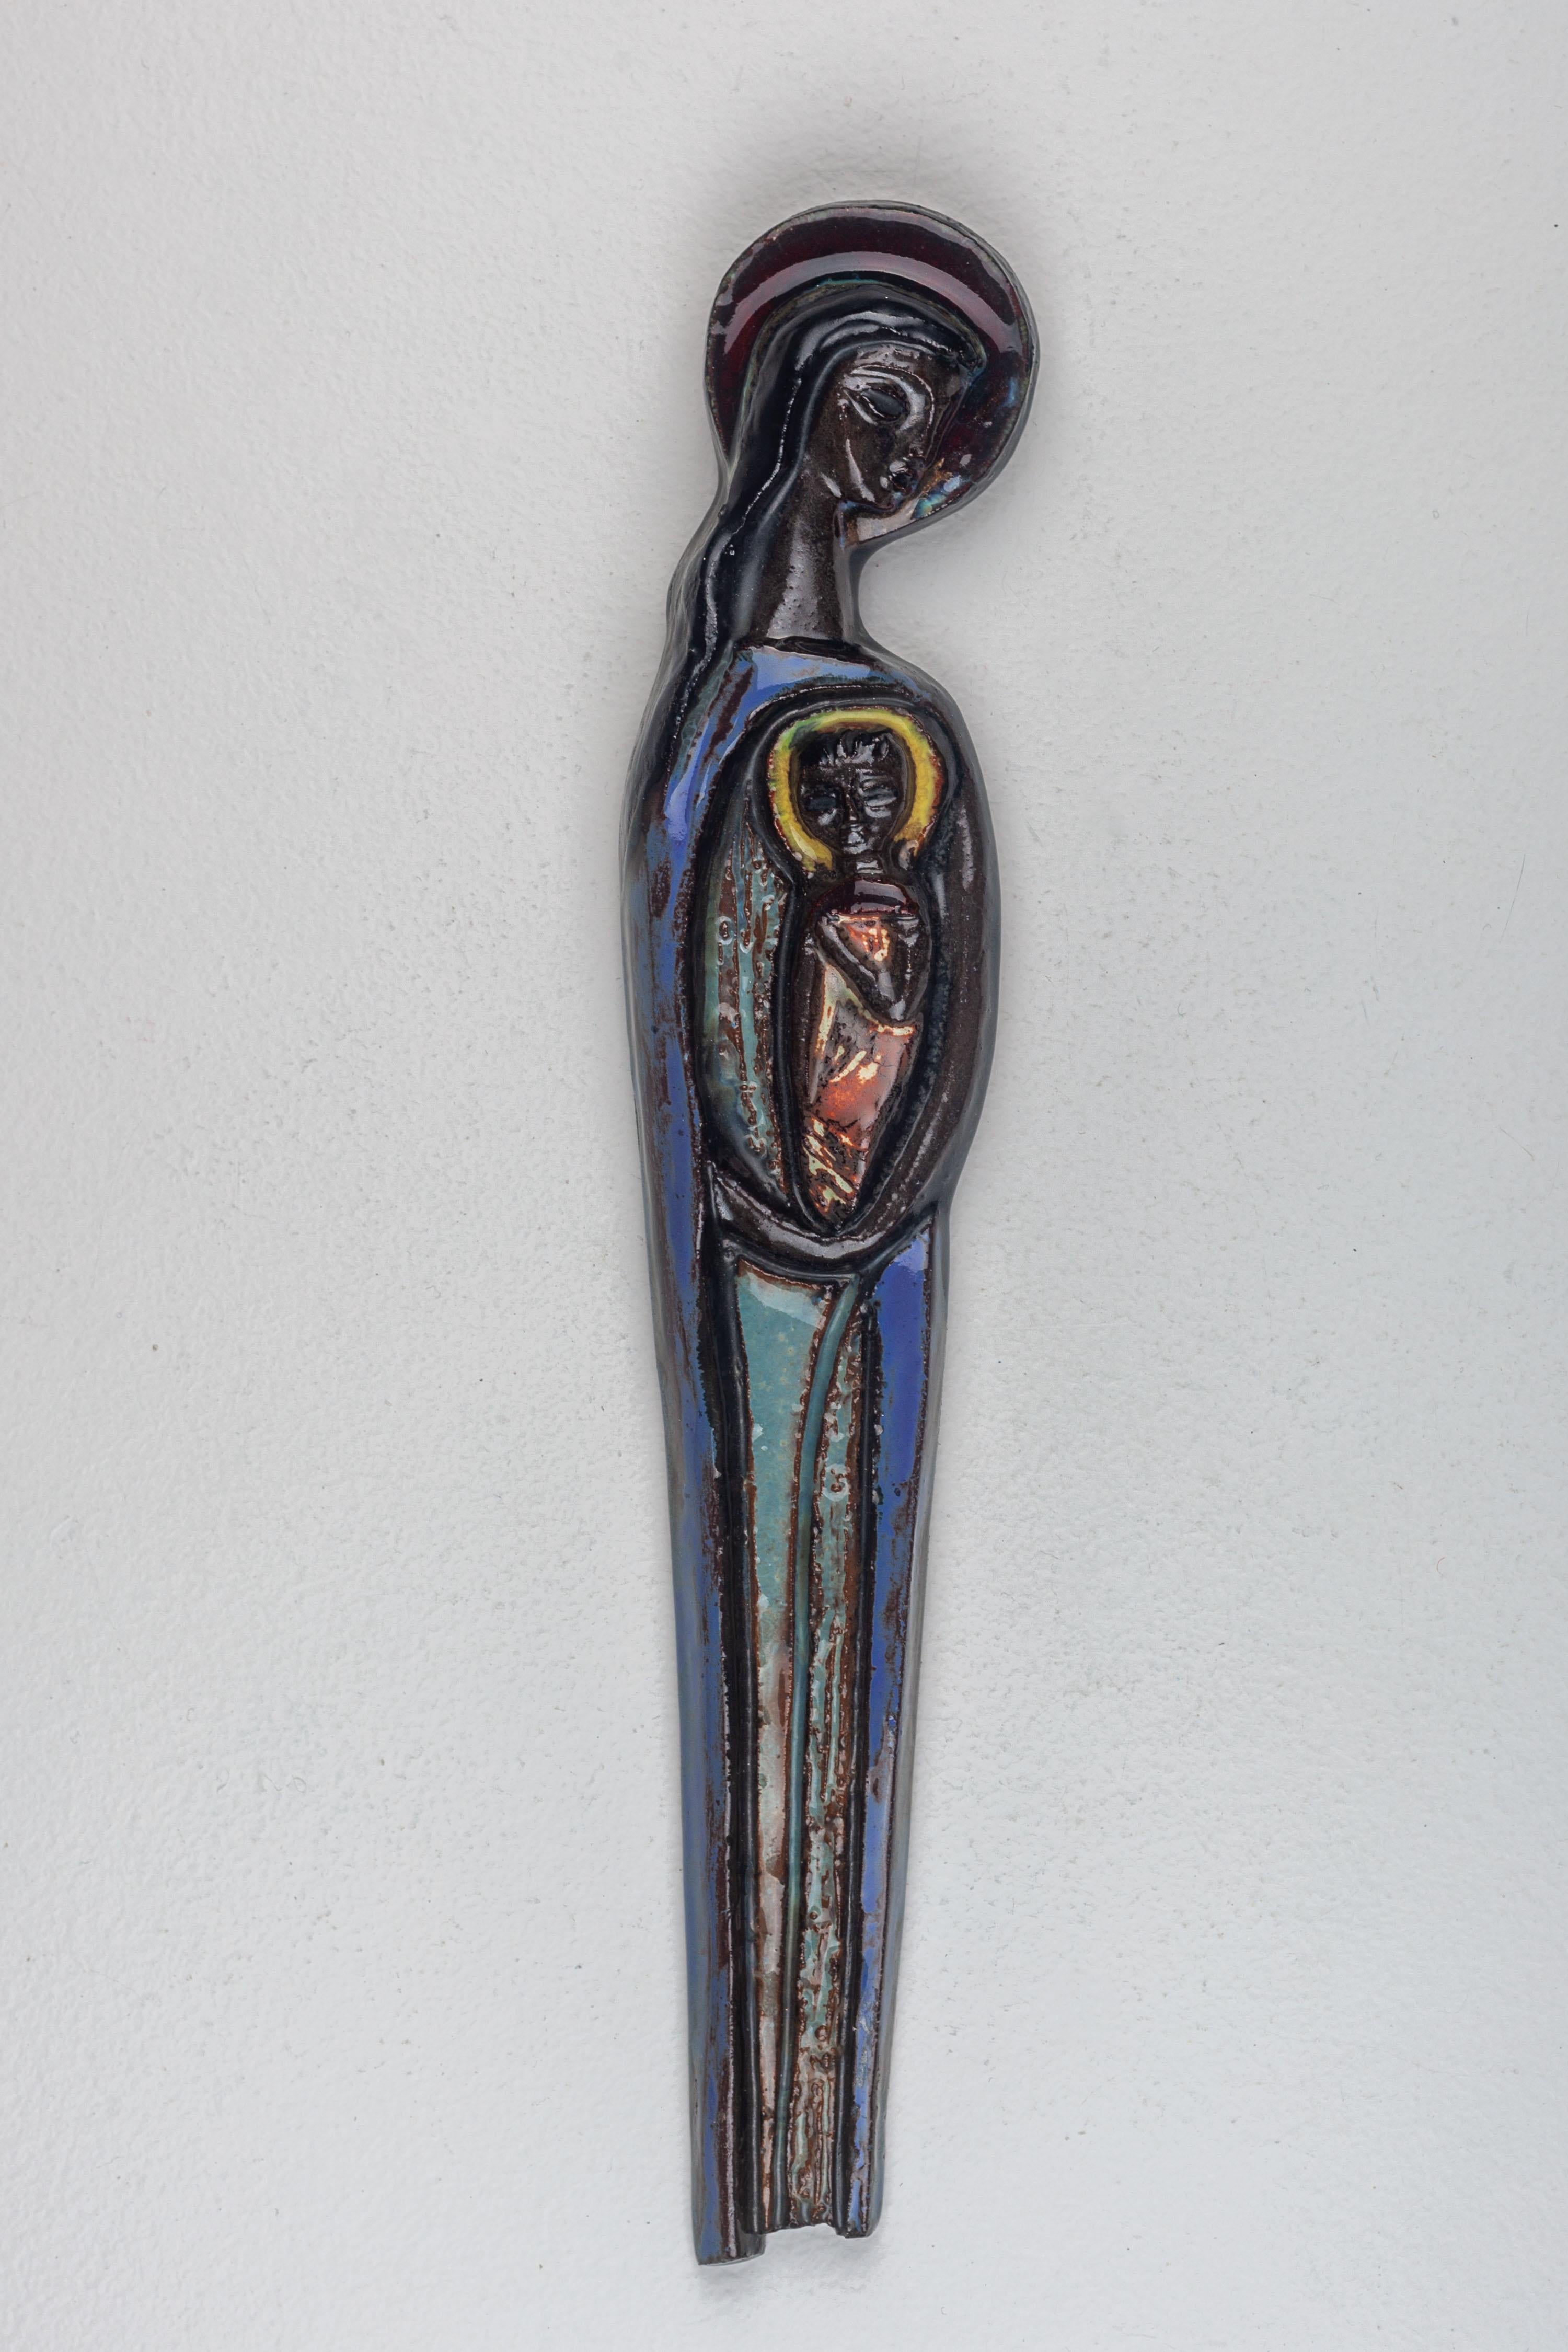 This piece of mid-century ceramic wall art captures the Virgin Mary as she cradles the Christ child. The sculpture is defined by its deep, resonant color palette, utilizing rich blues and stark blacks finished with a semi-gloss glaze that subtly